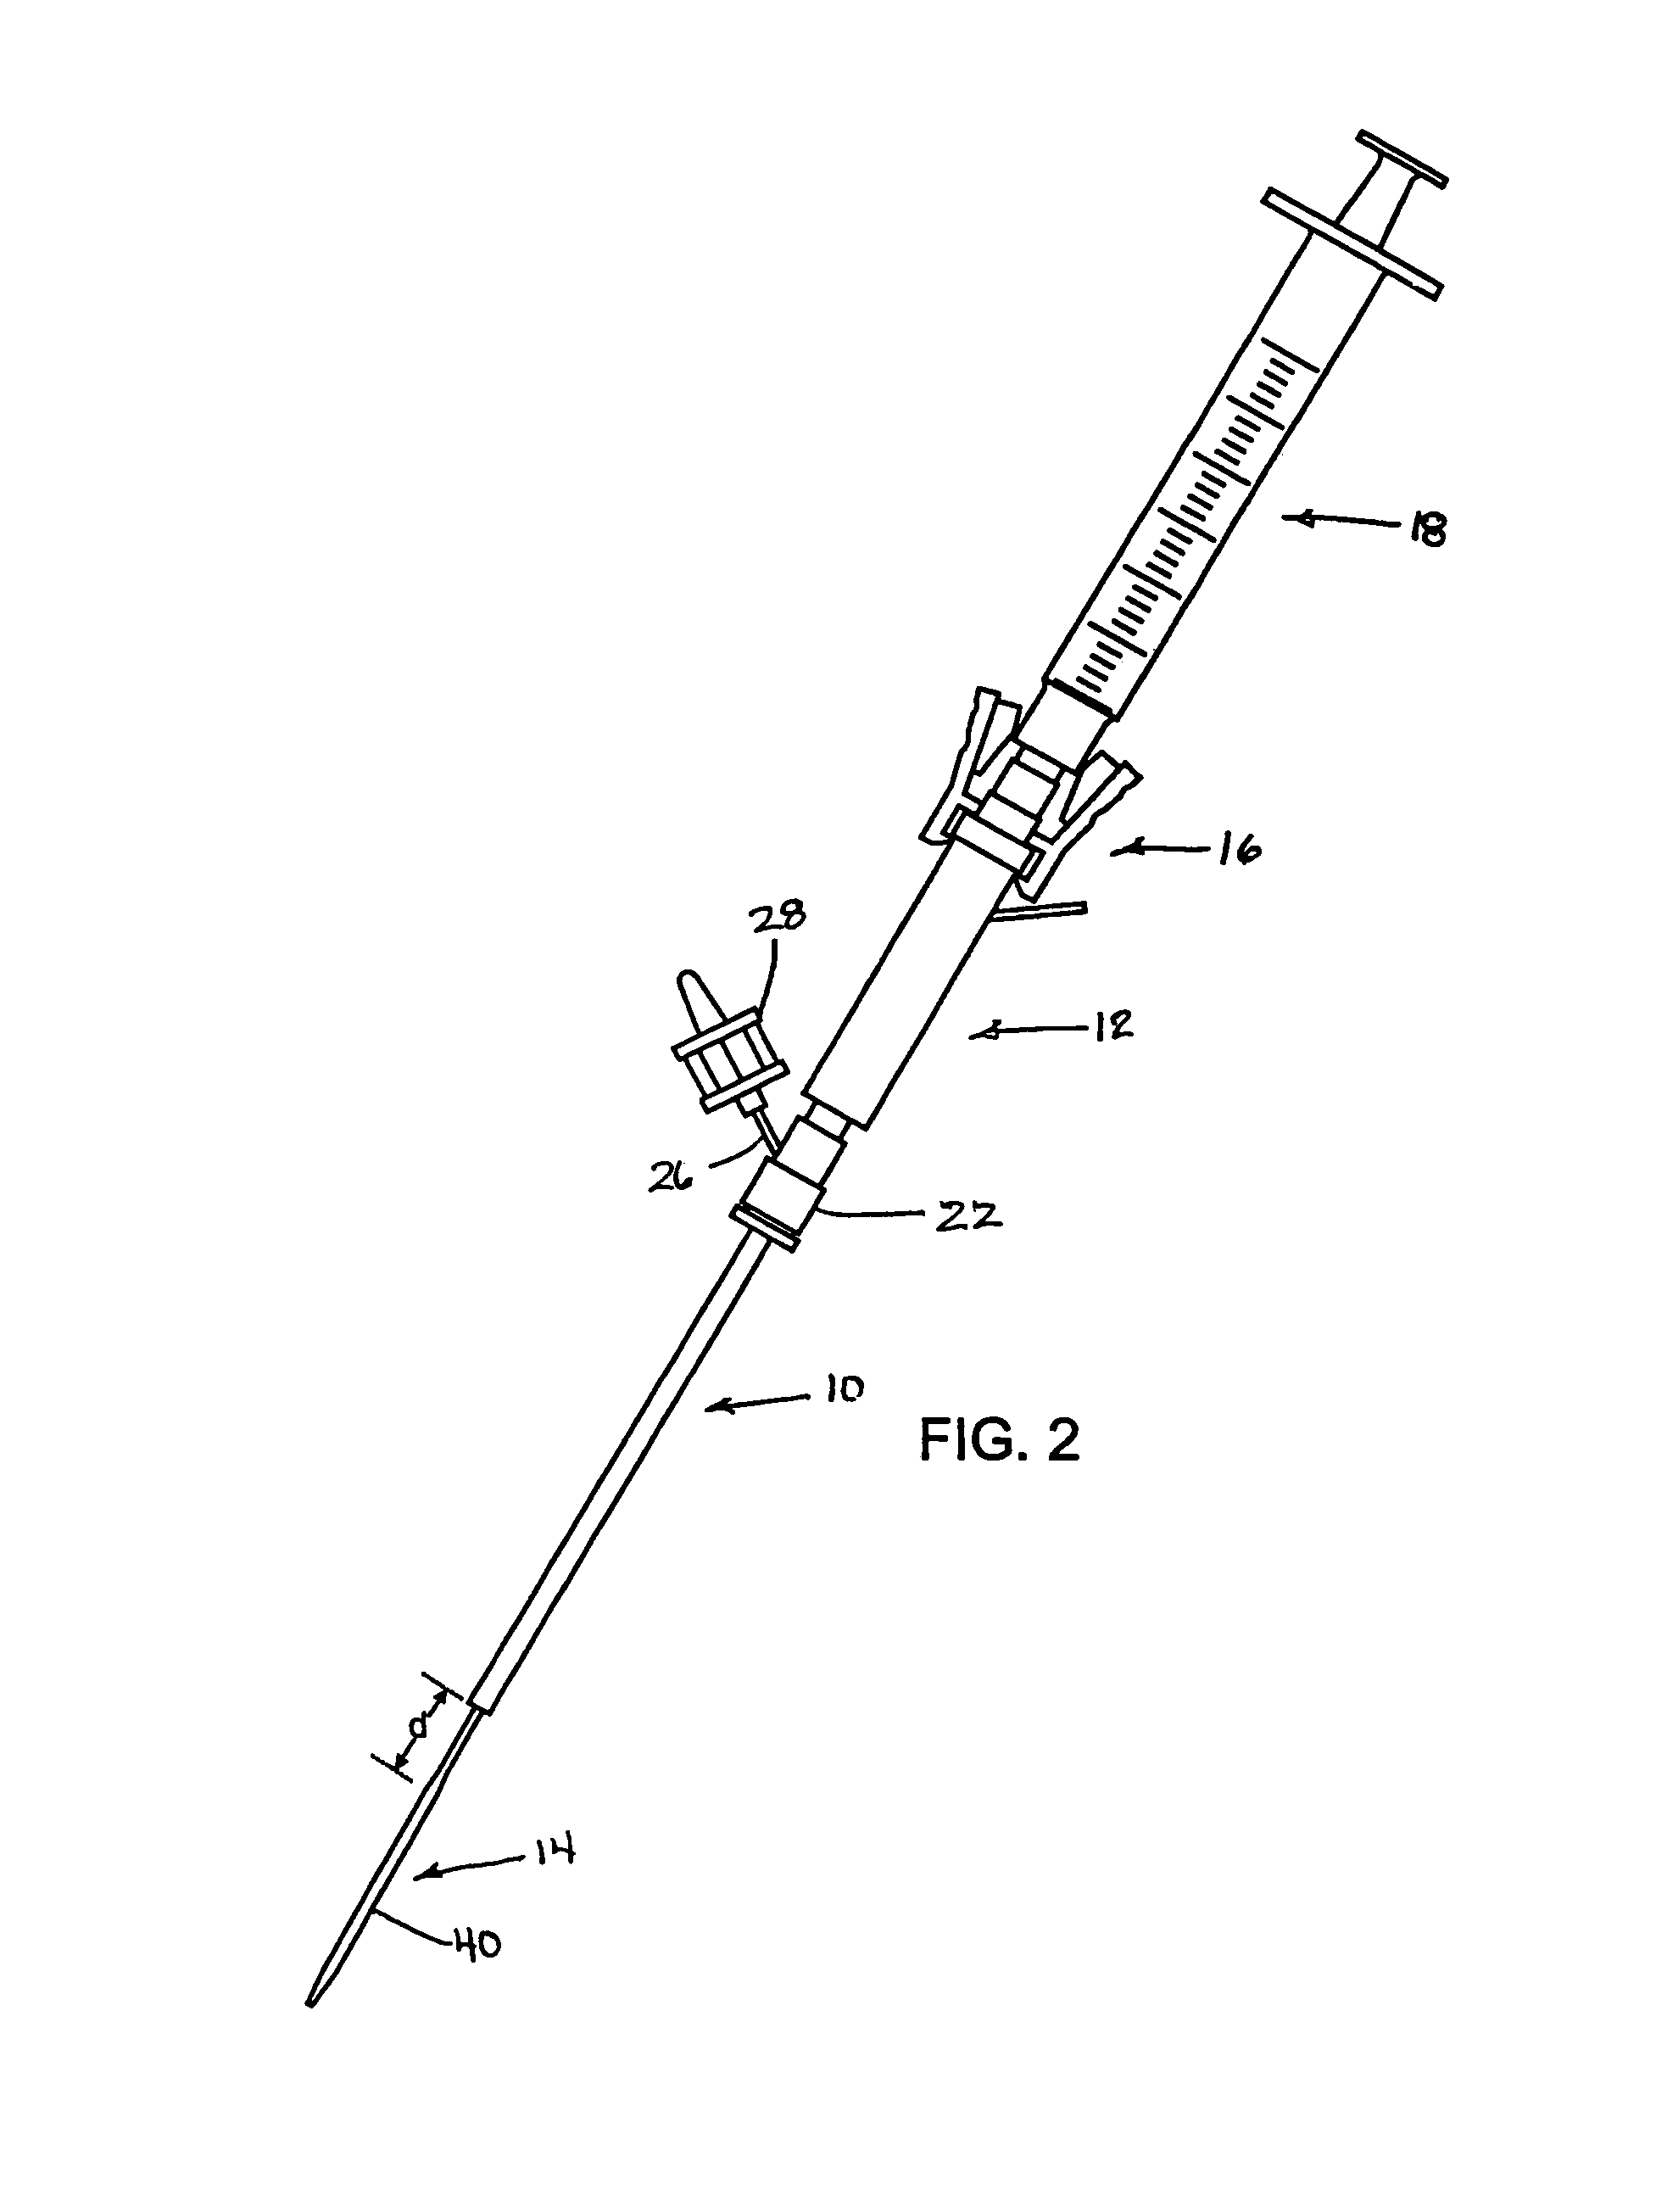 Pledget-handling system and method for delivering hemostasis promoting material to a blood vessel puncture site by fluid pressure